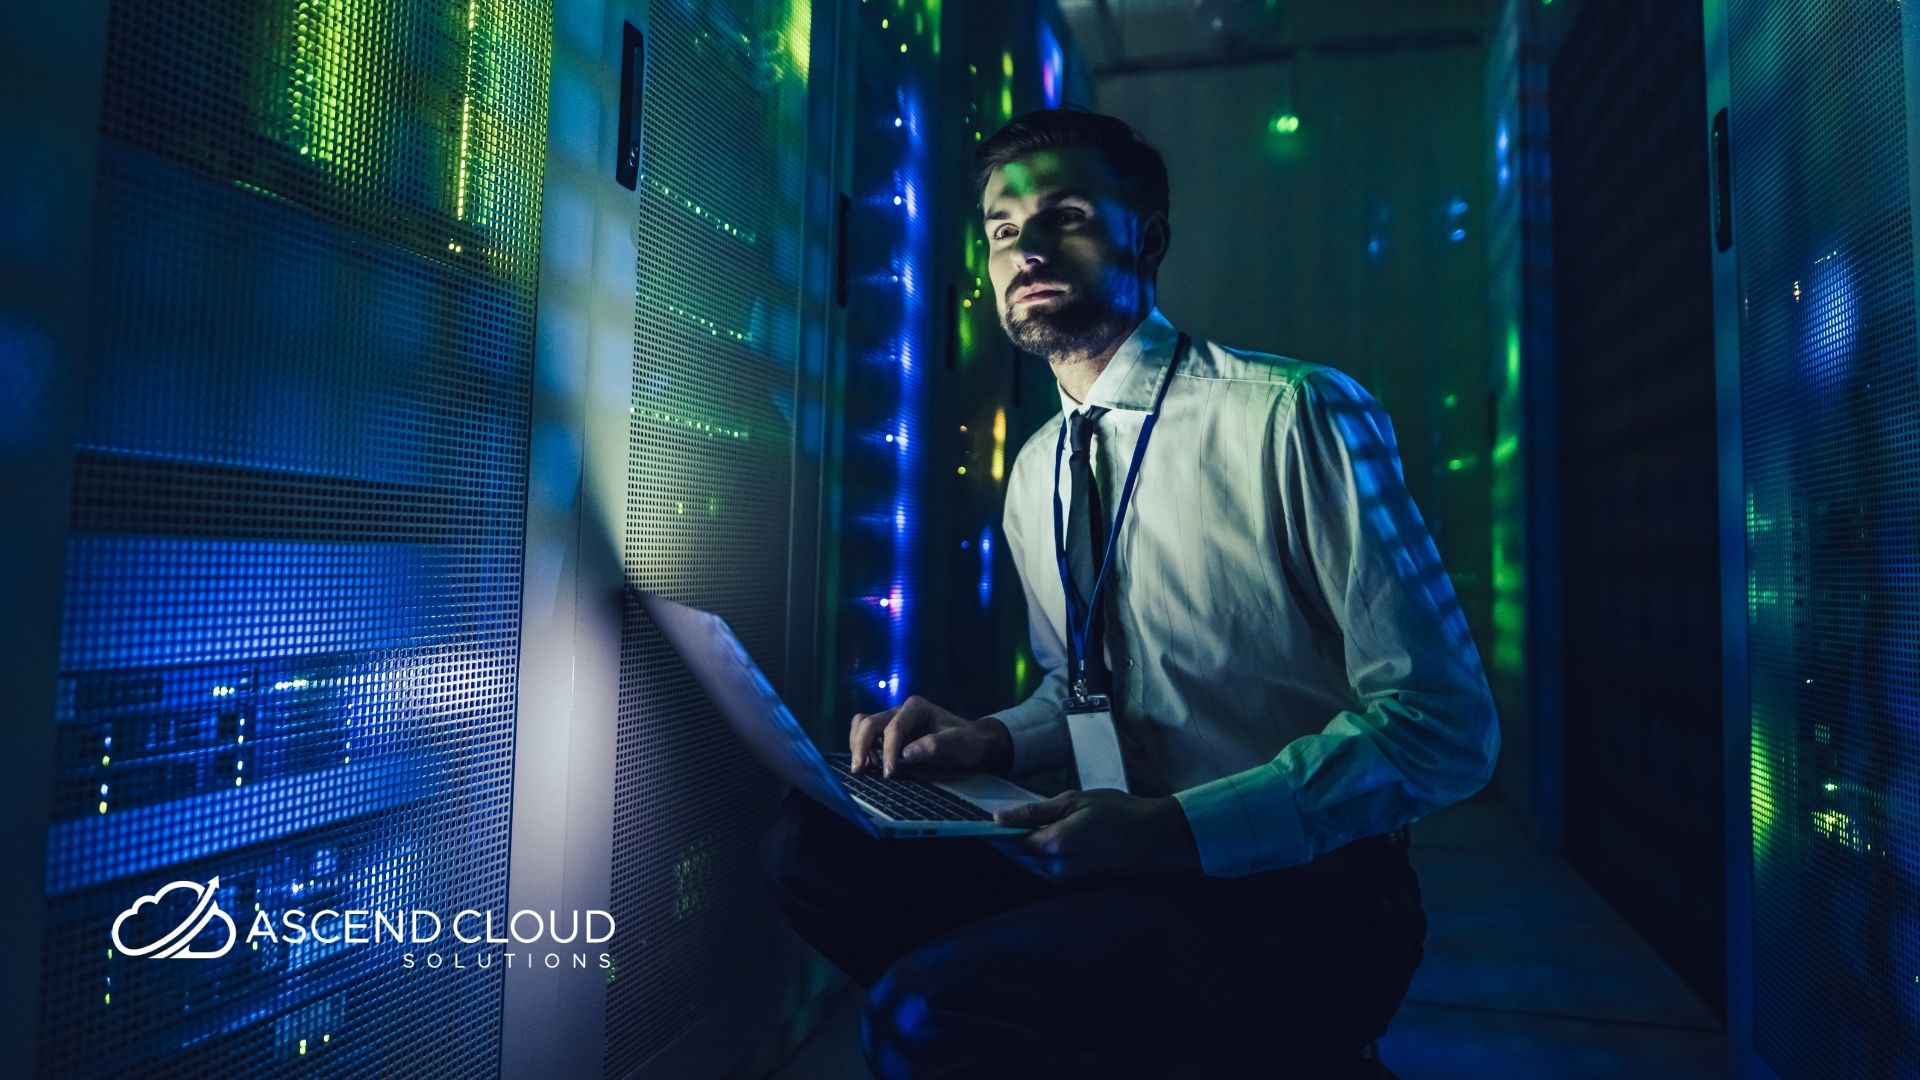 Your business's cloud infrastructure is dependent on data centres. That's why data centre security is crucial. Read on to find out how they manage risk.